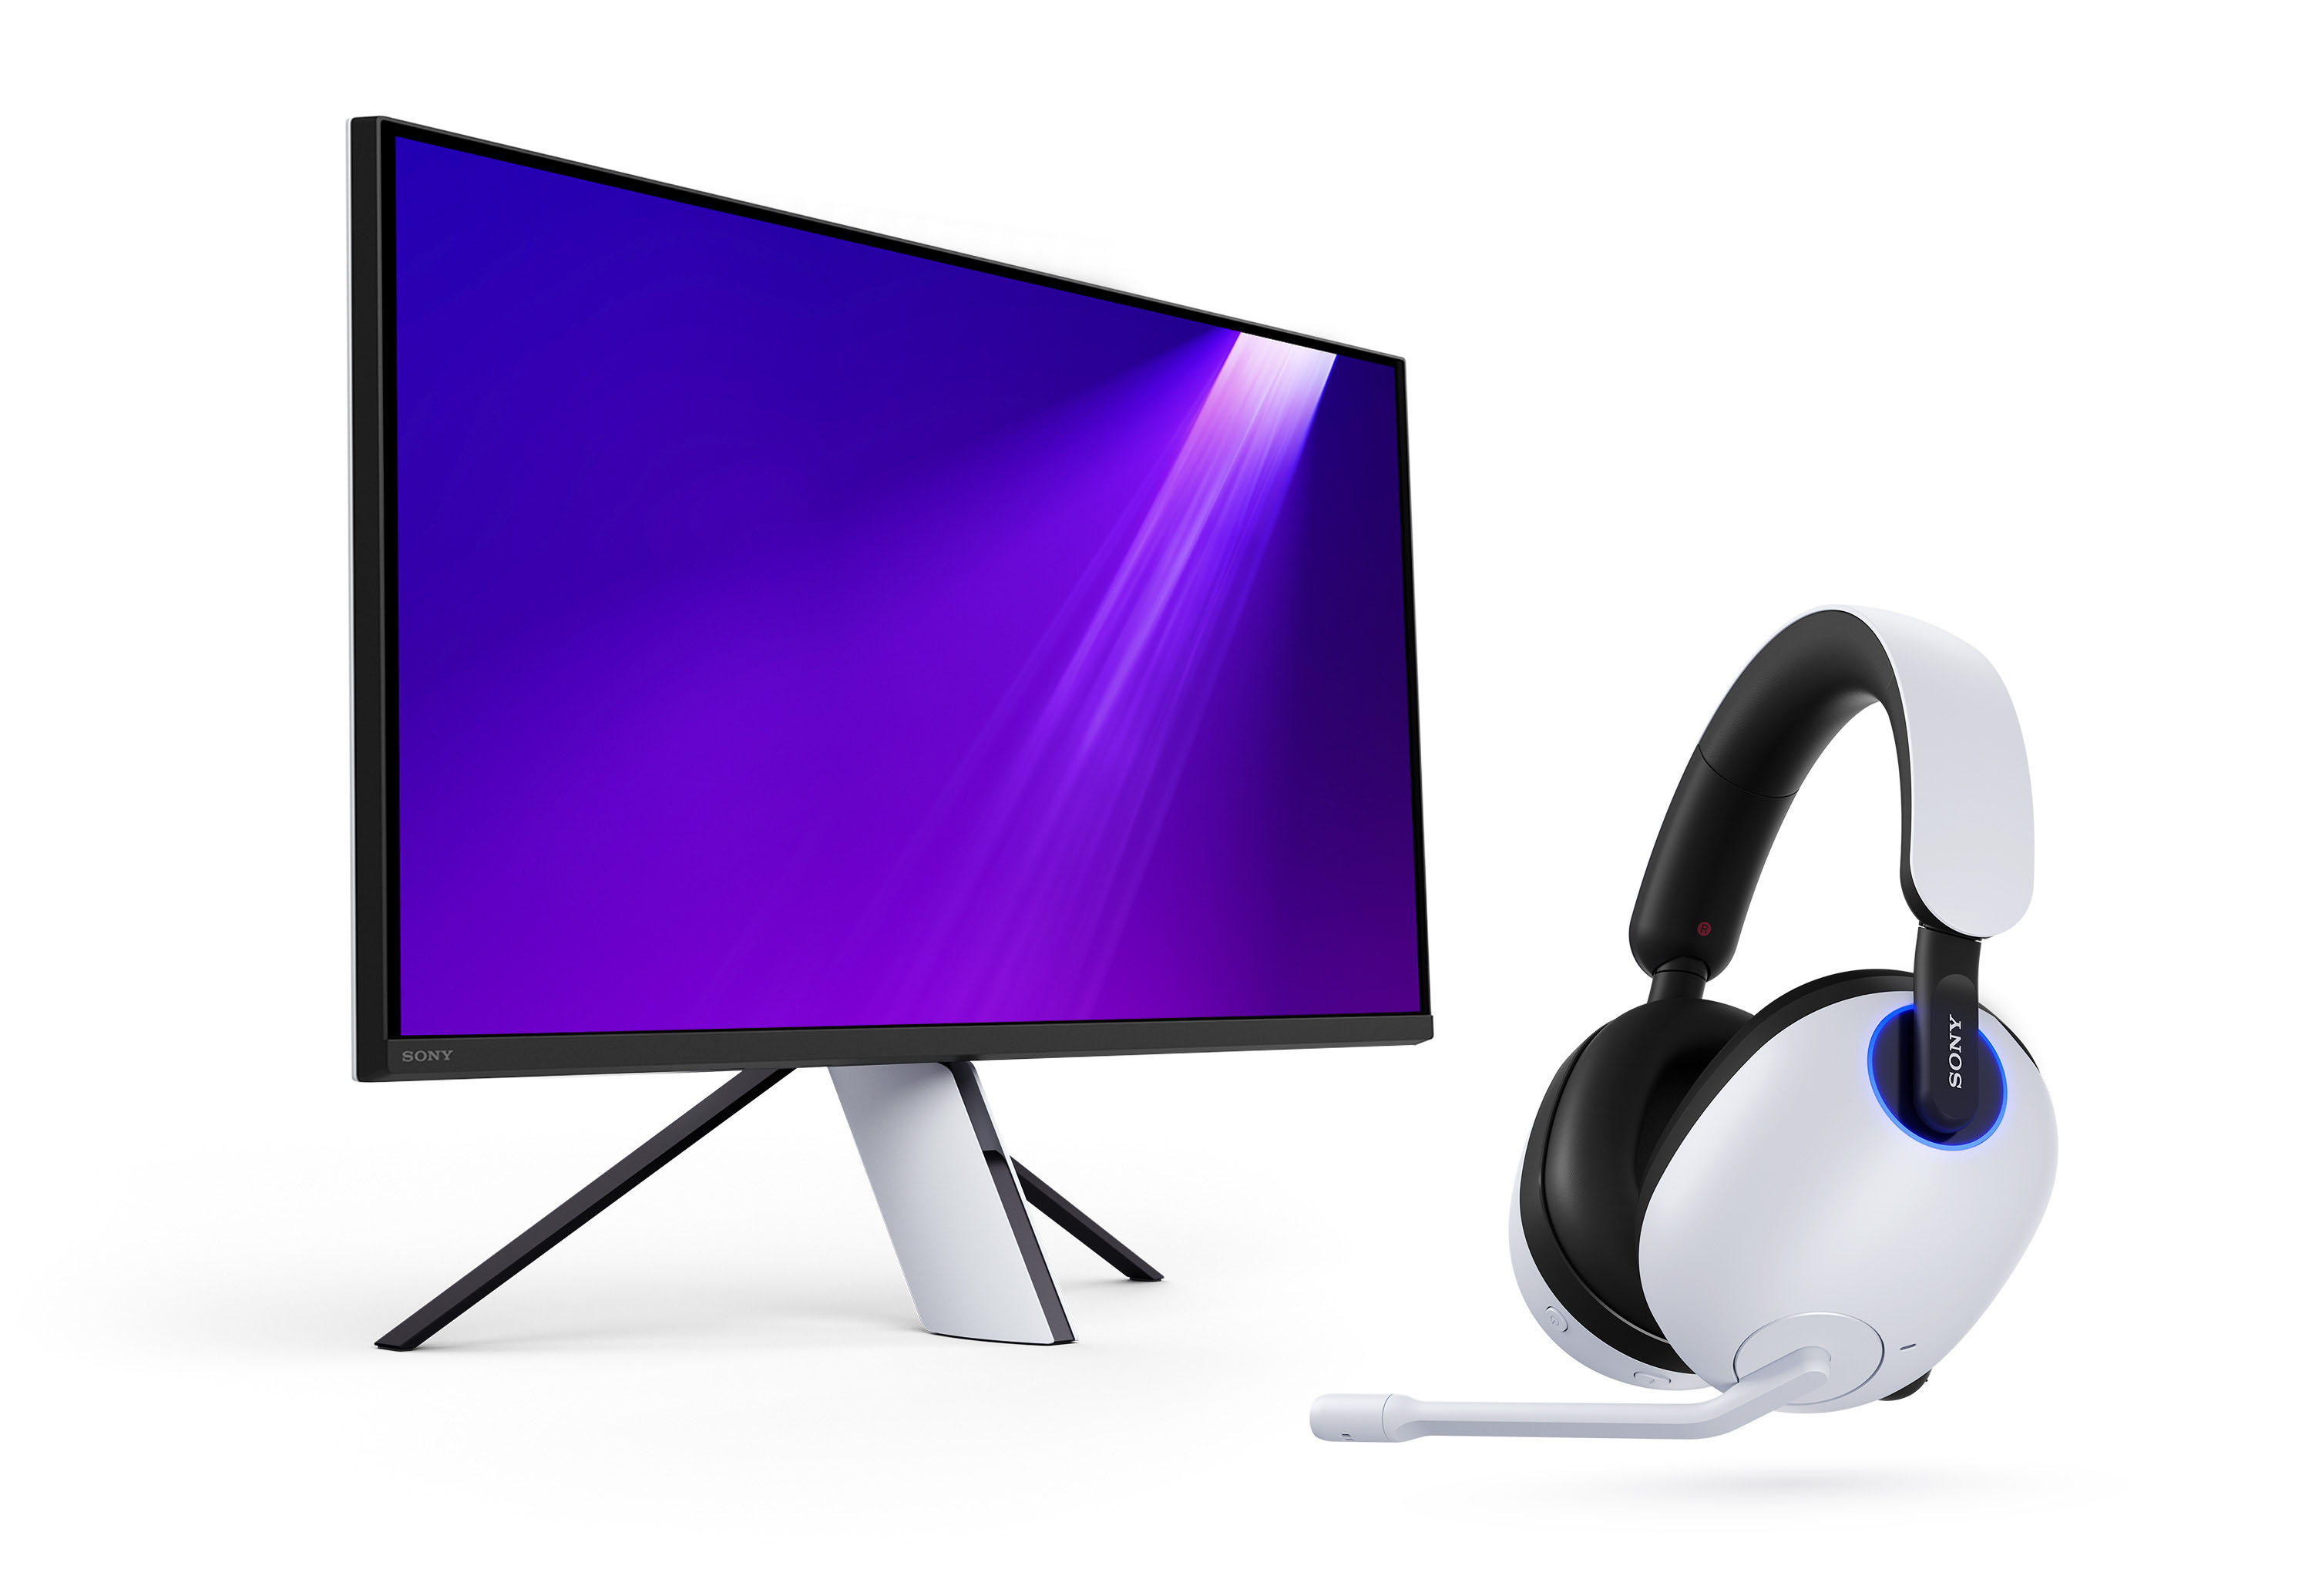 A product image of Sony’s new M9 gaming monitor and H9 wireless headset